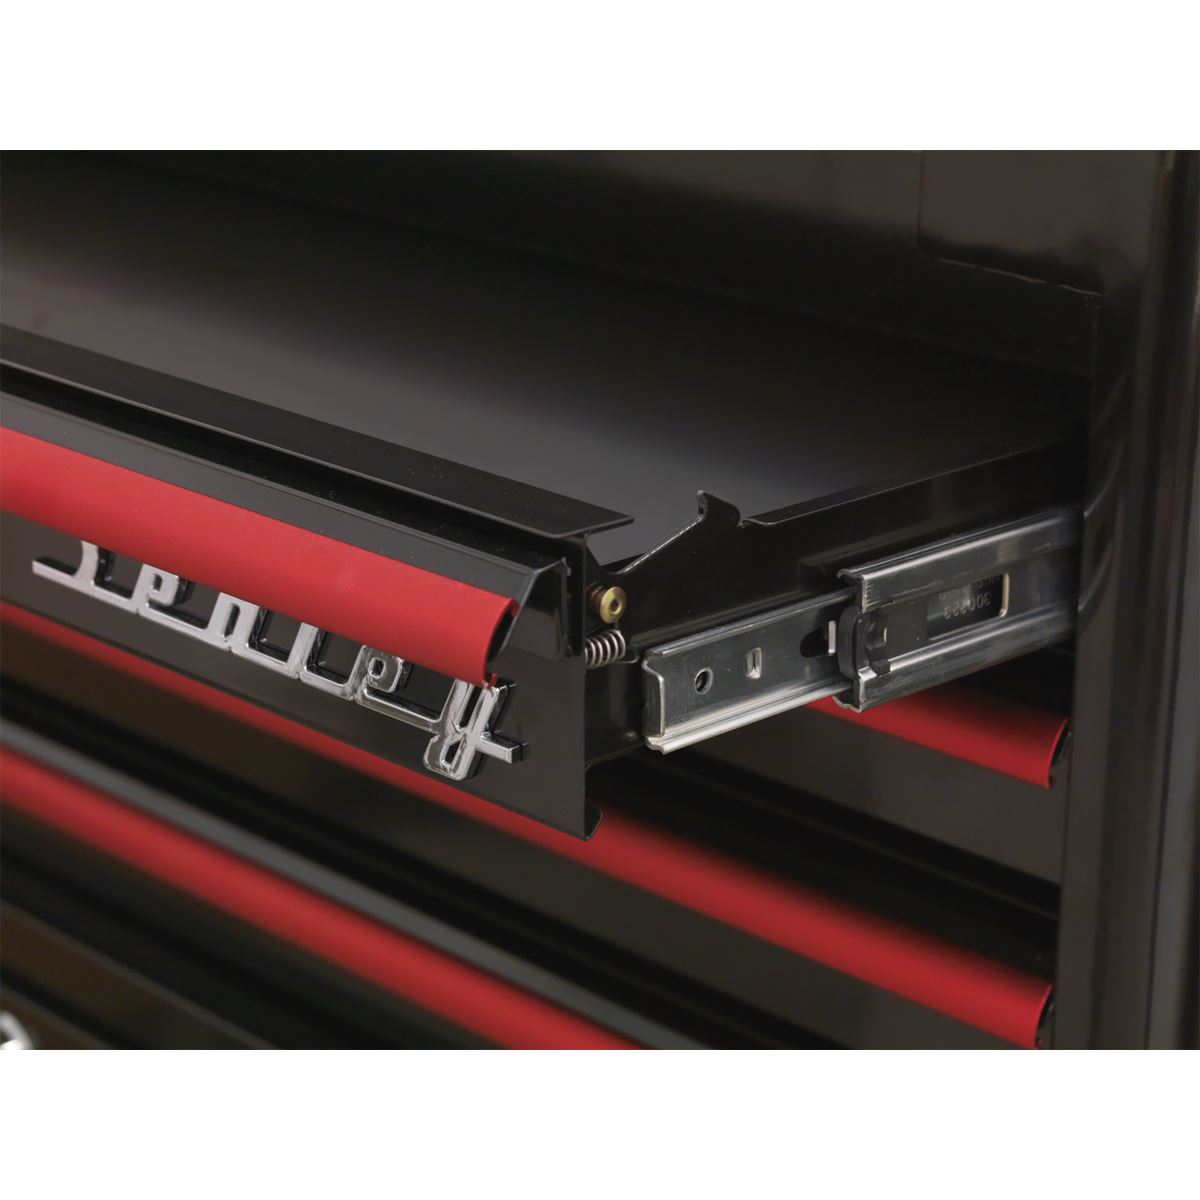 Sealey Premier Mid-Box Tool Chest 2 Drawer Retro Style - Black with Red Anodised Drawer Pulls